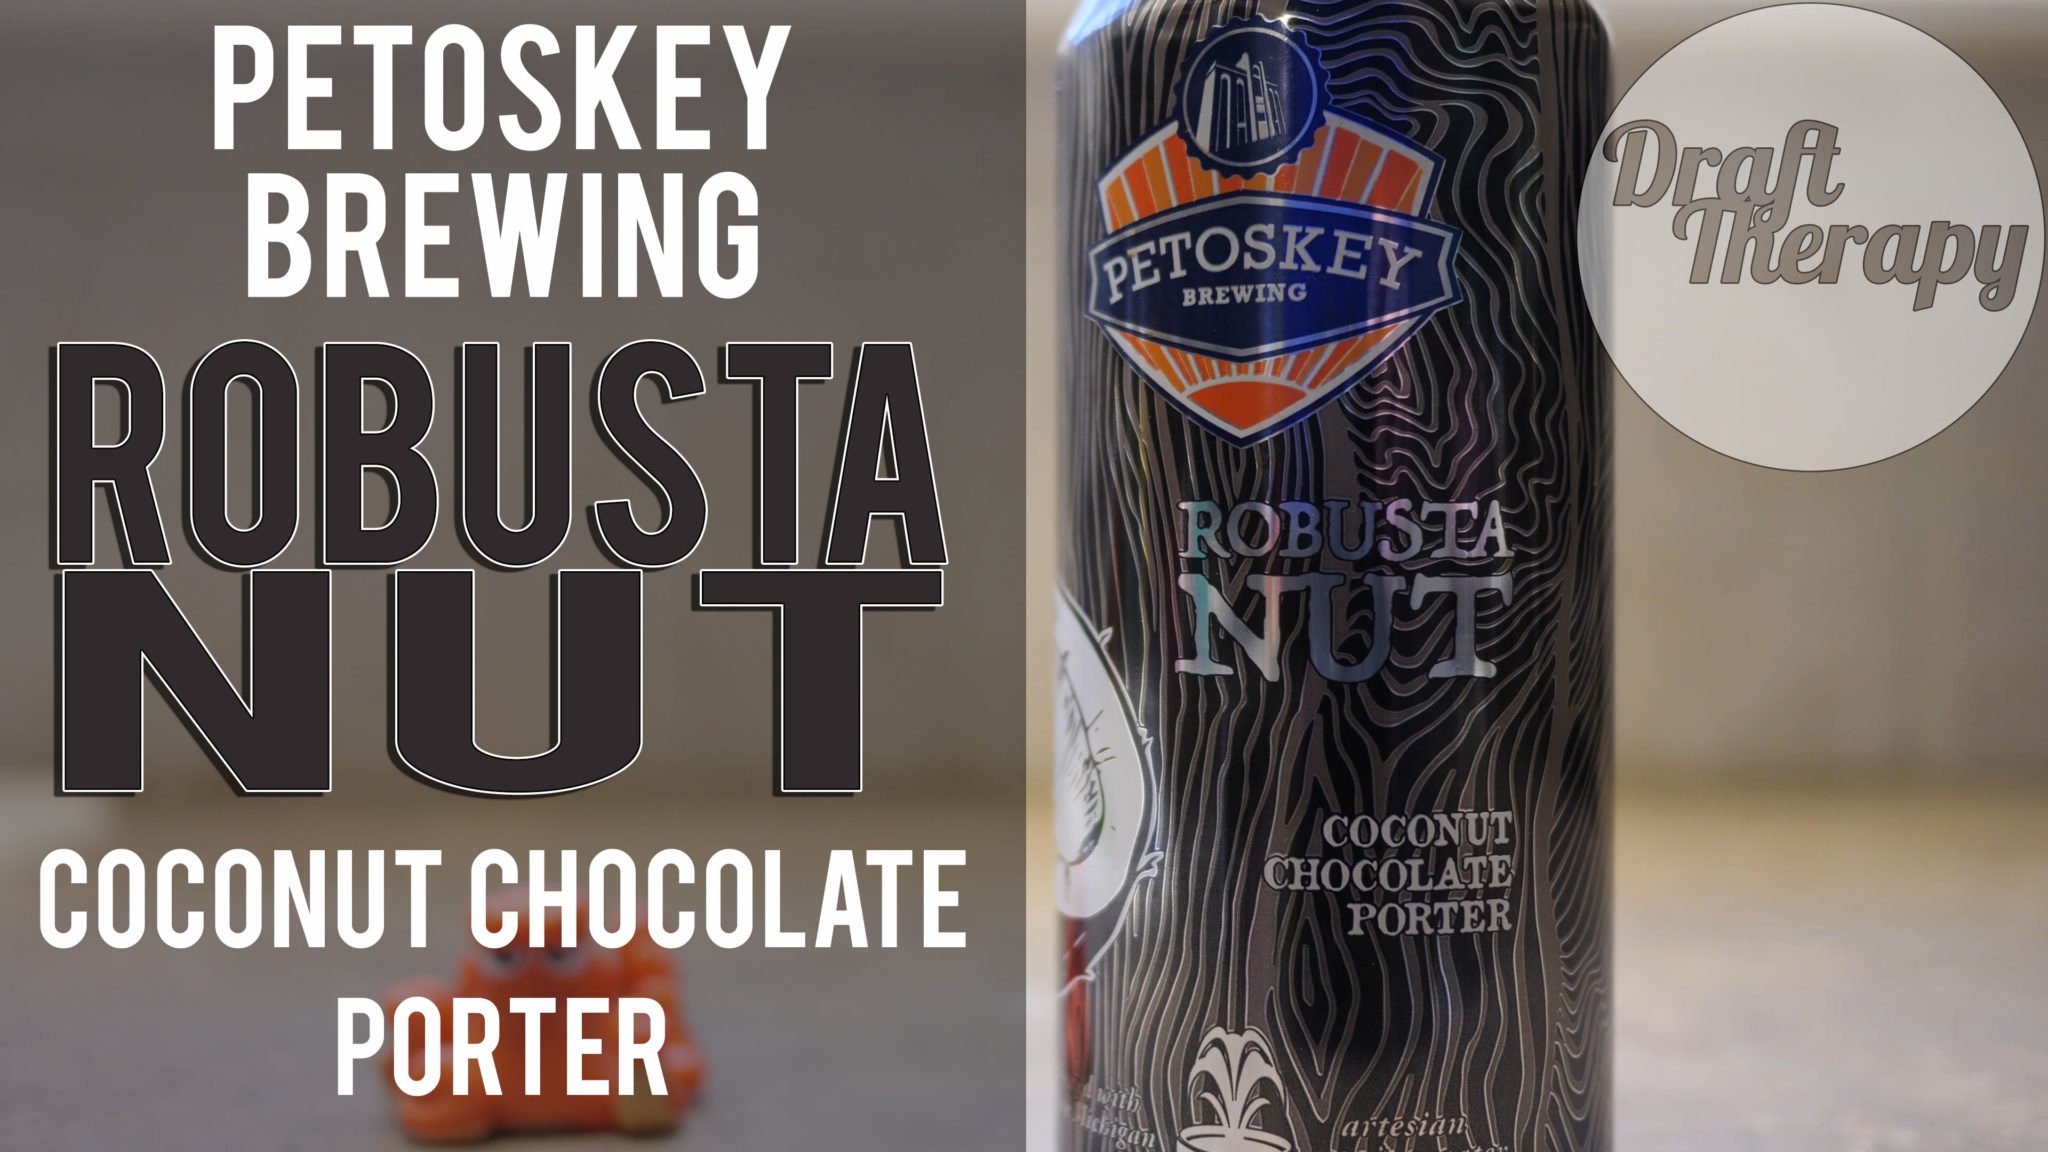 You are currently viewing Petoskey Brewing – Robusta Nut Coconut Chocolate Porter